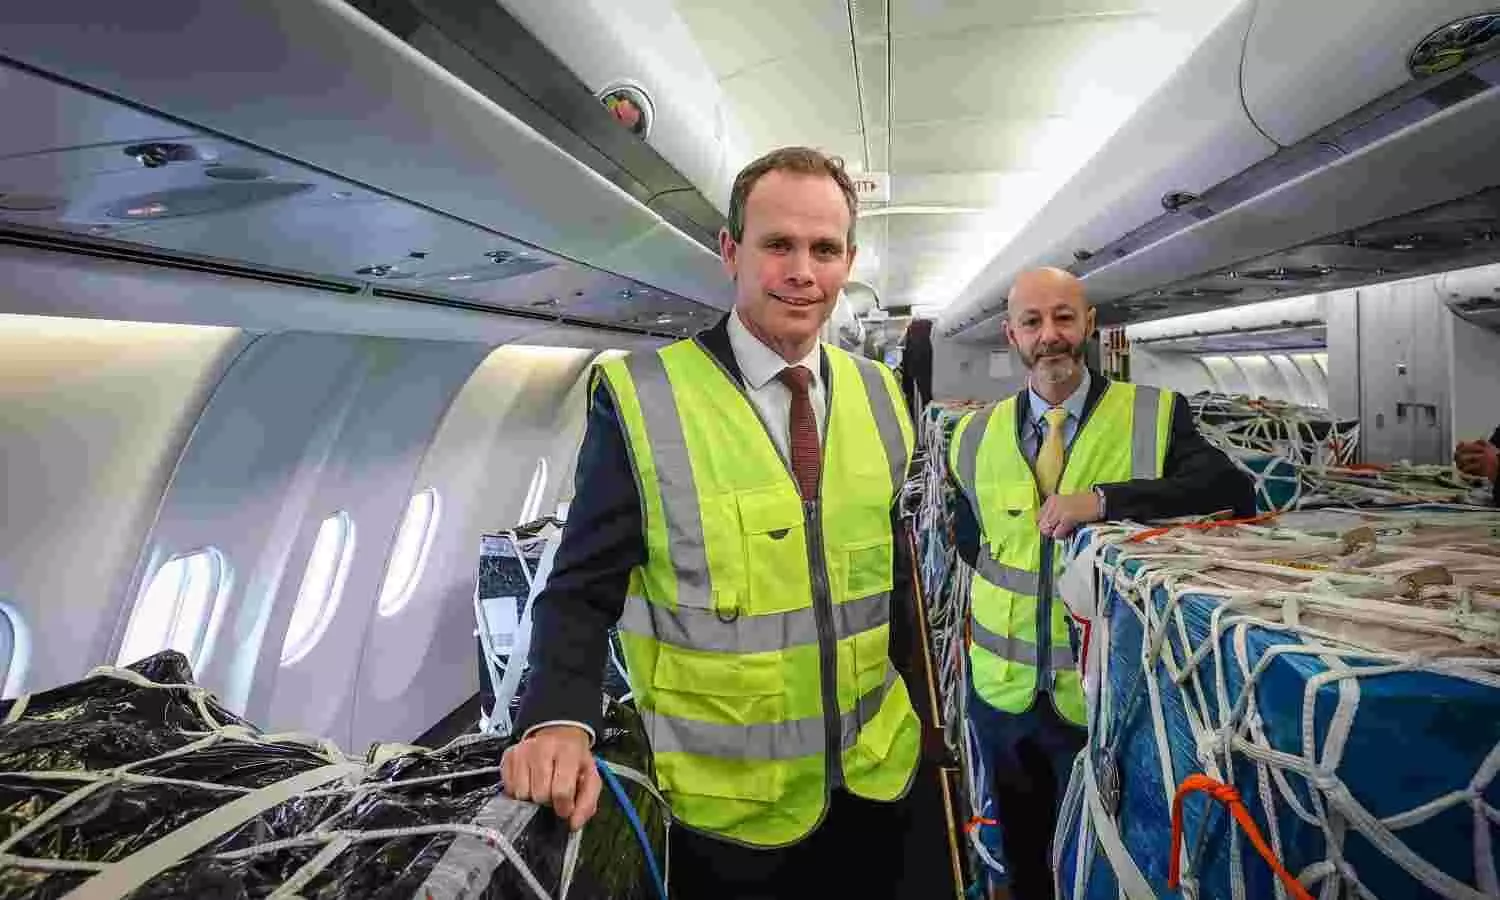 Andrew Bell, CEO, Regional & City Airports and Steve Gill, Managing Director, Bournemouth Airport